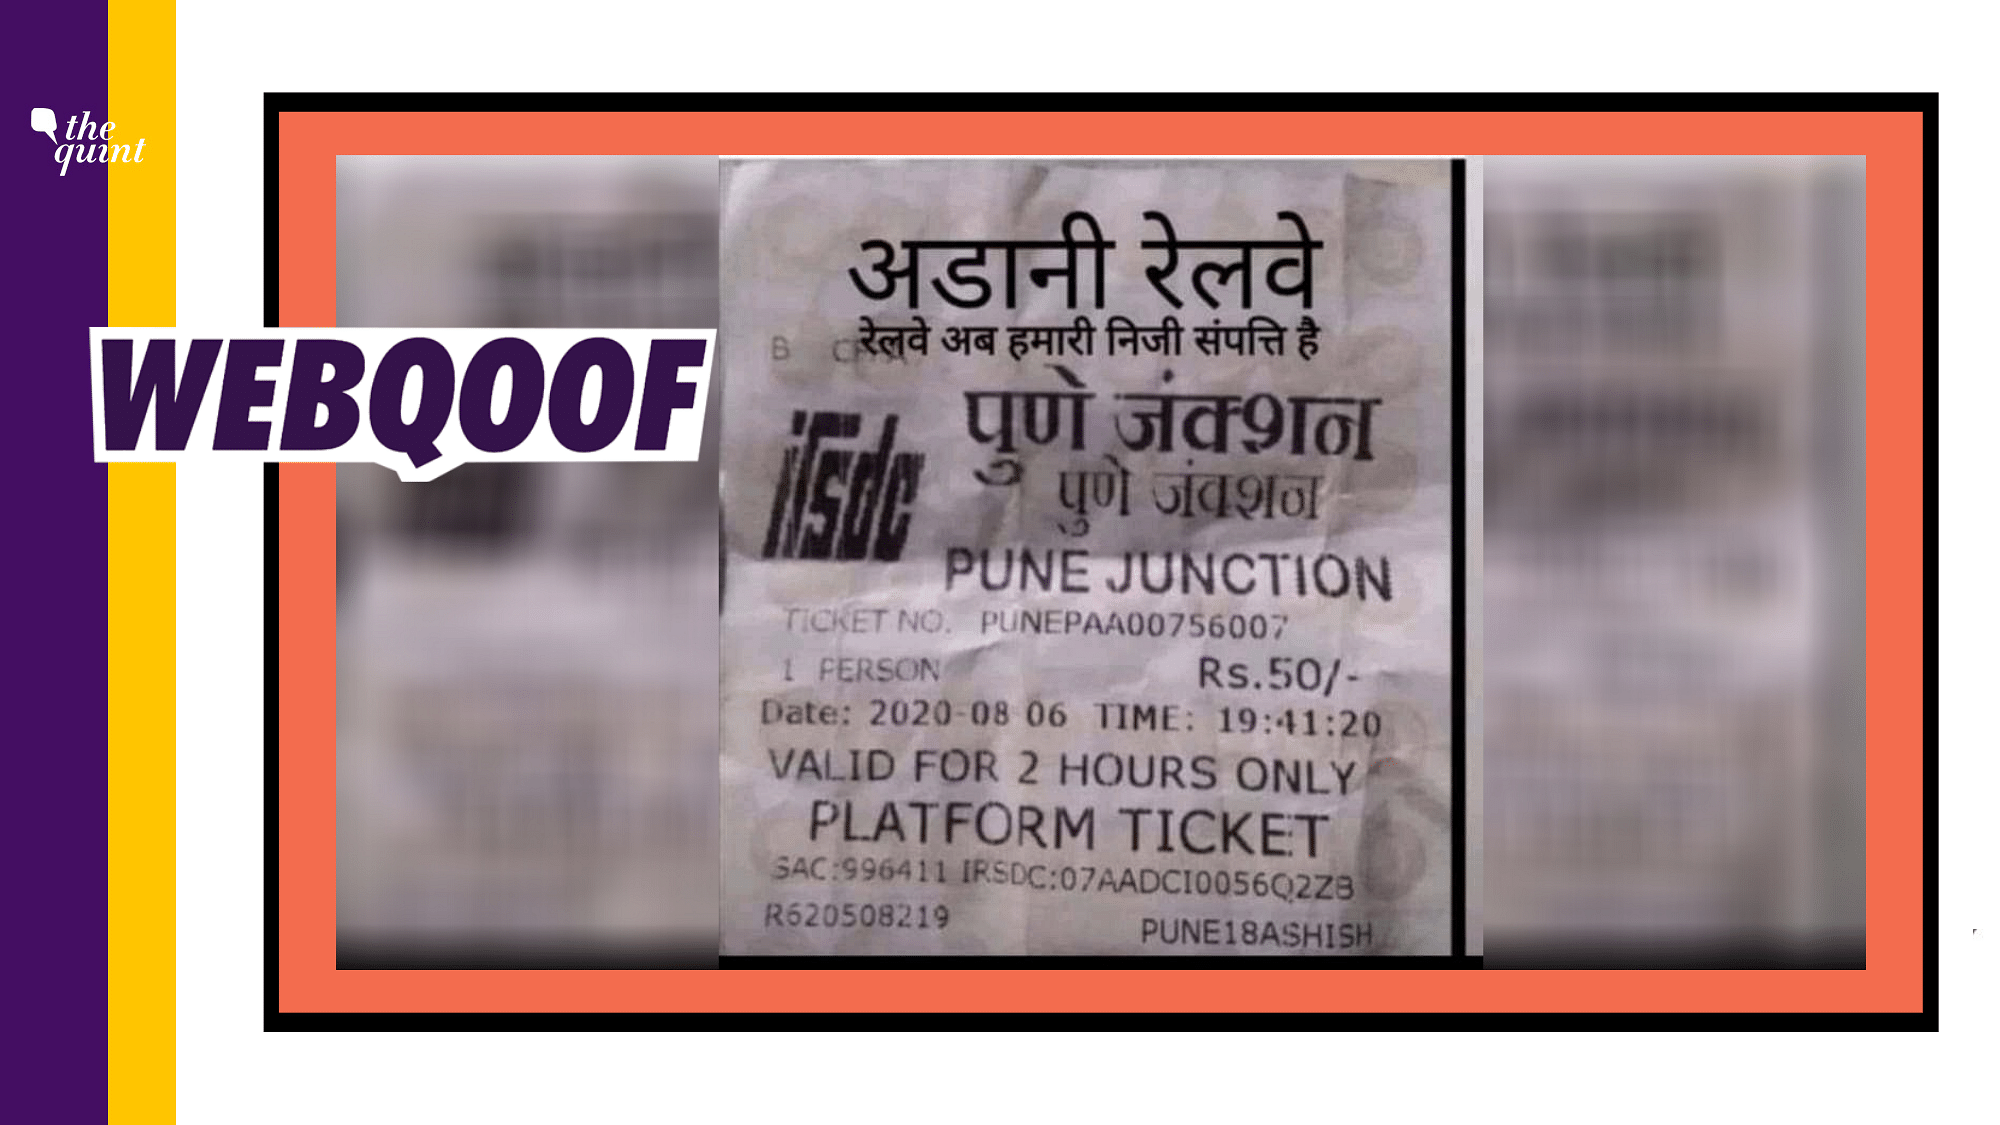 The original image, tweeted by journalist Prashant Kanojia in August, has been edited to say ‘Adani Railway - Railway is now our private property’ instead of ‘Pune Junction.’